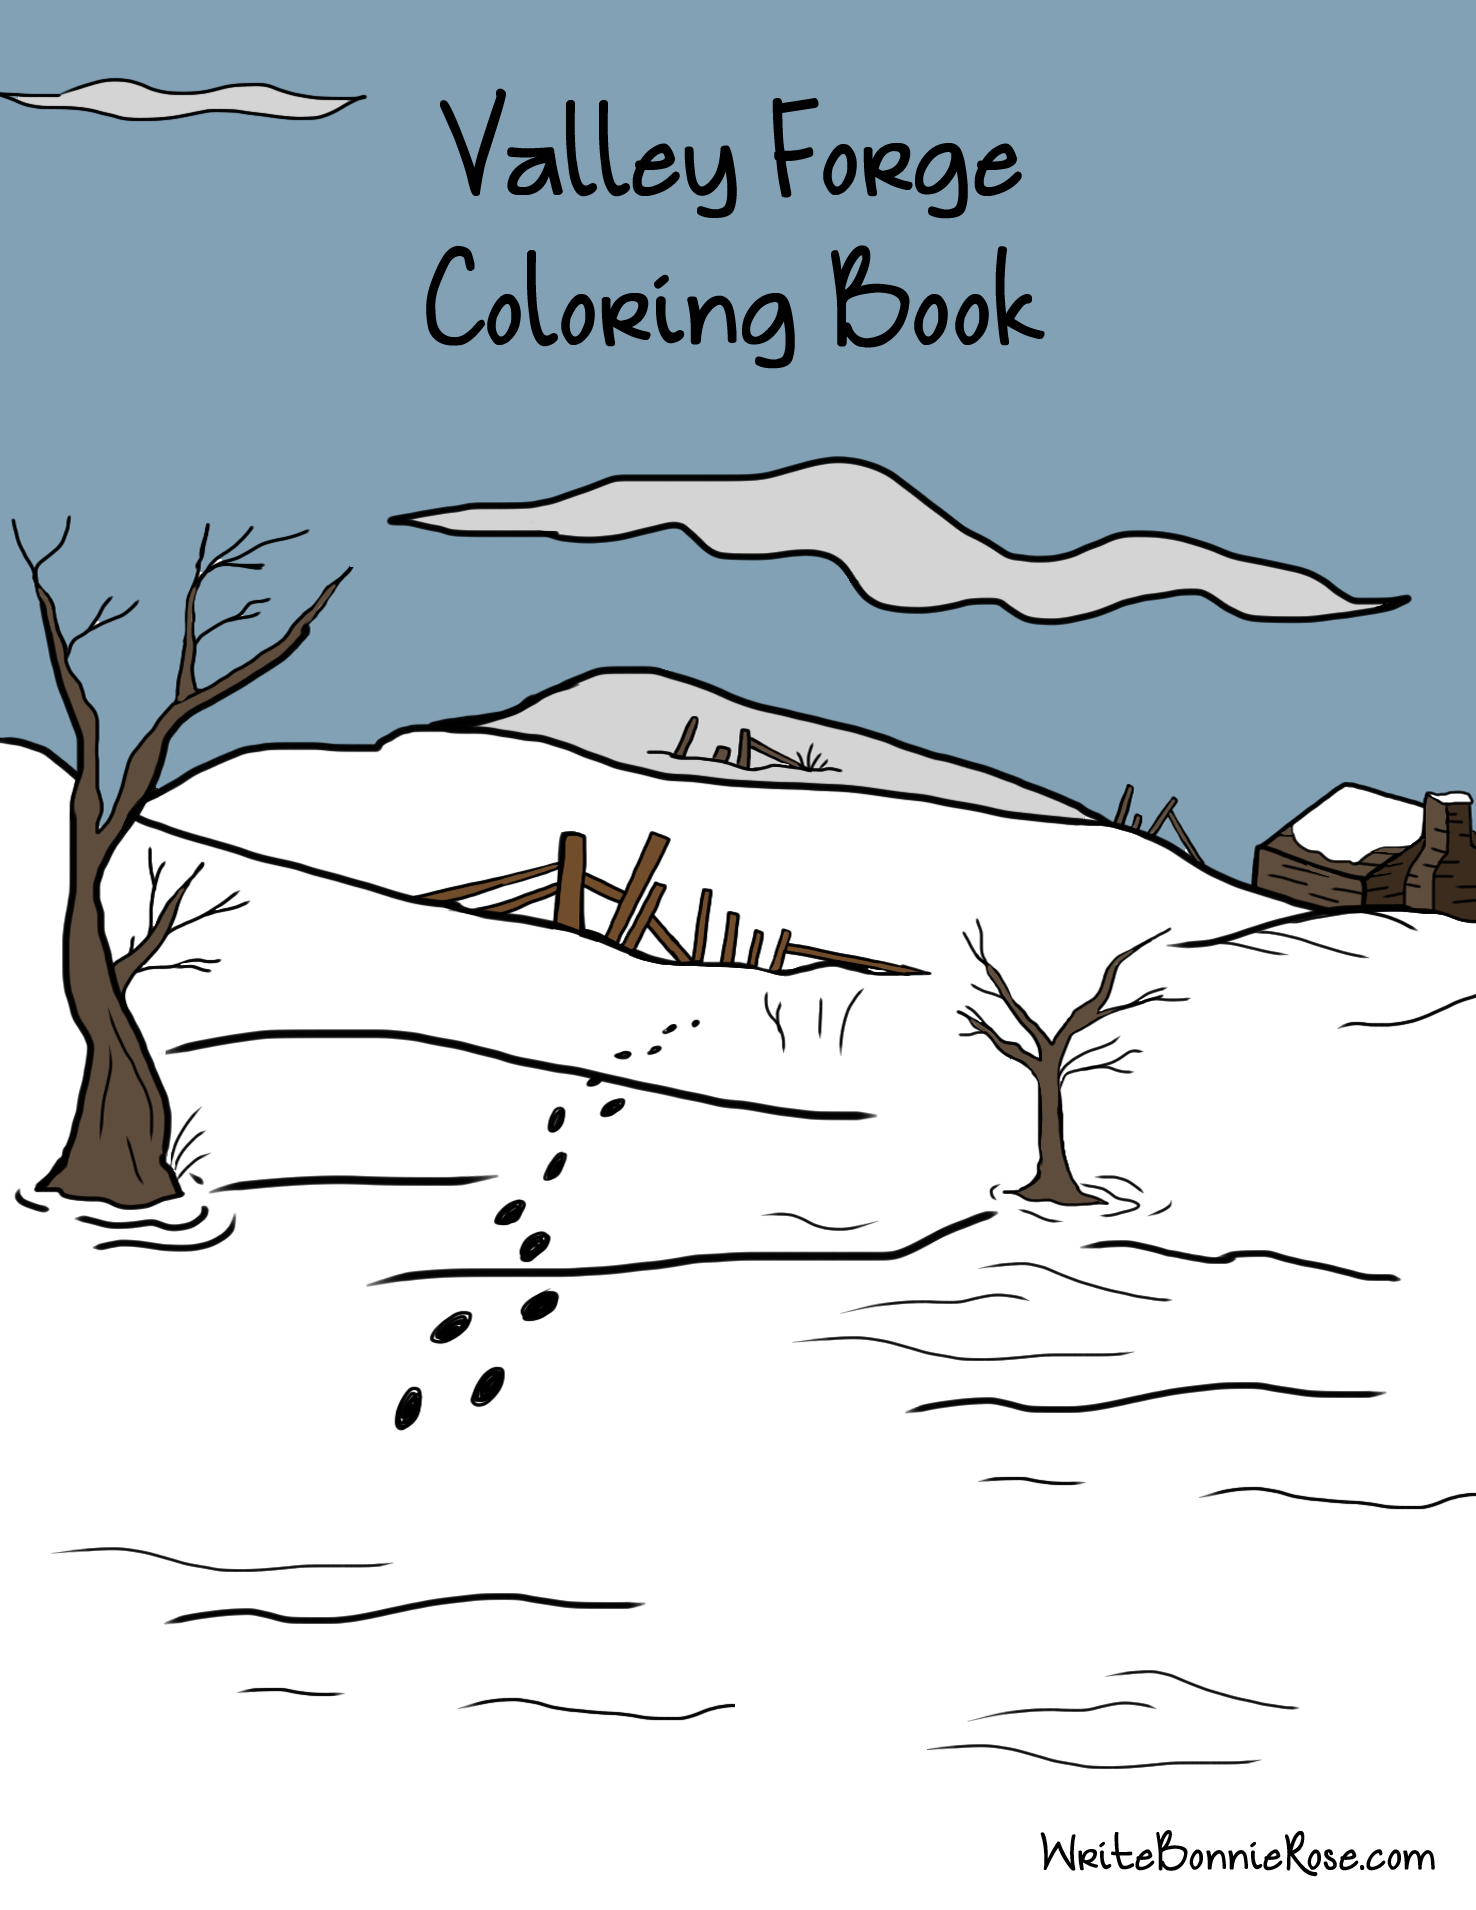 FREE Valley Forge Coloring Book